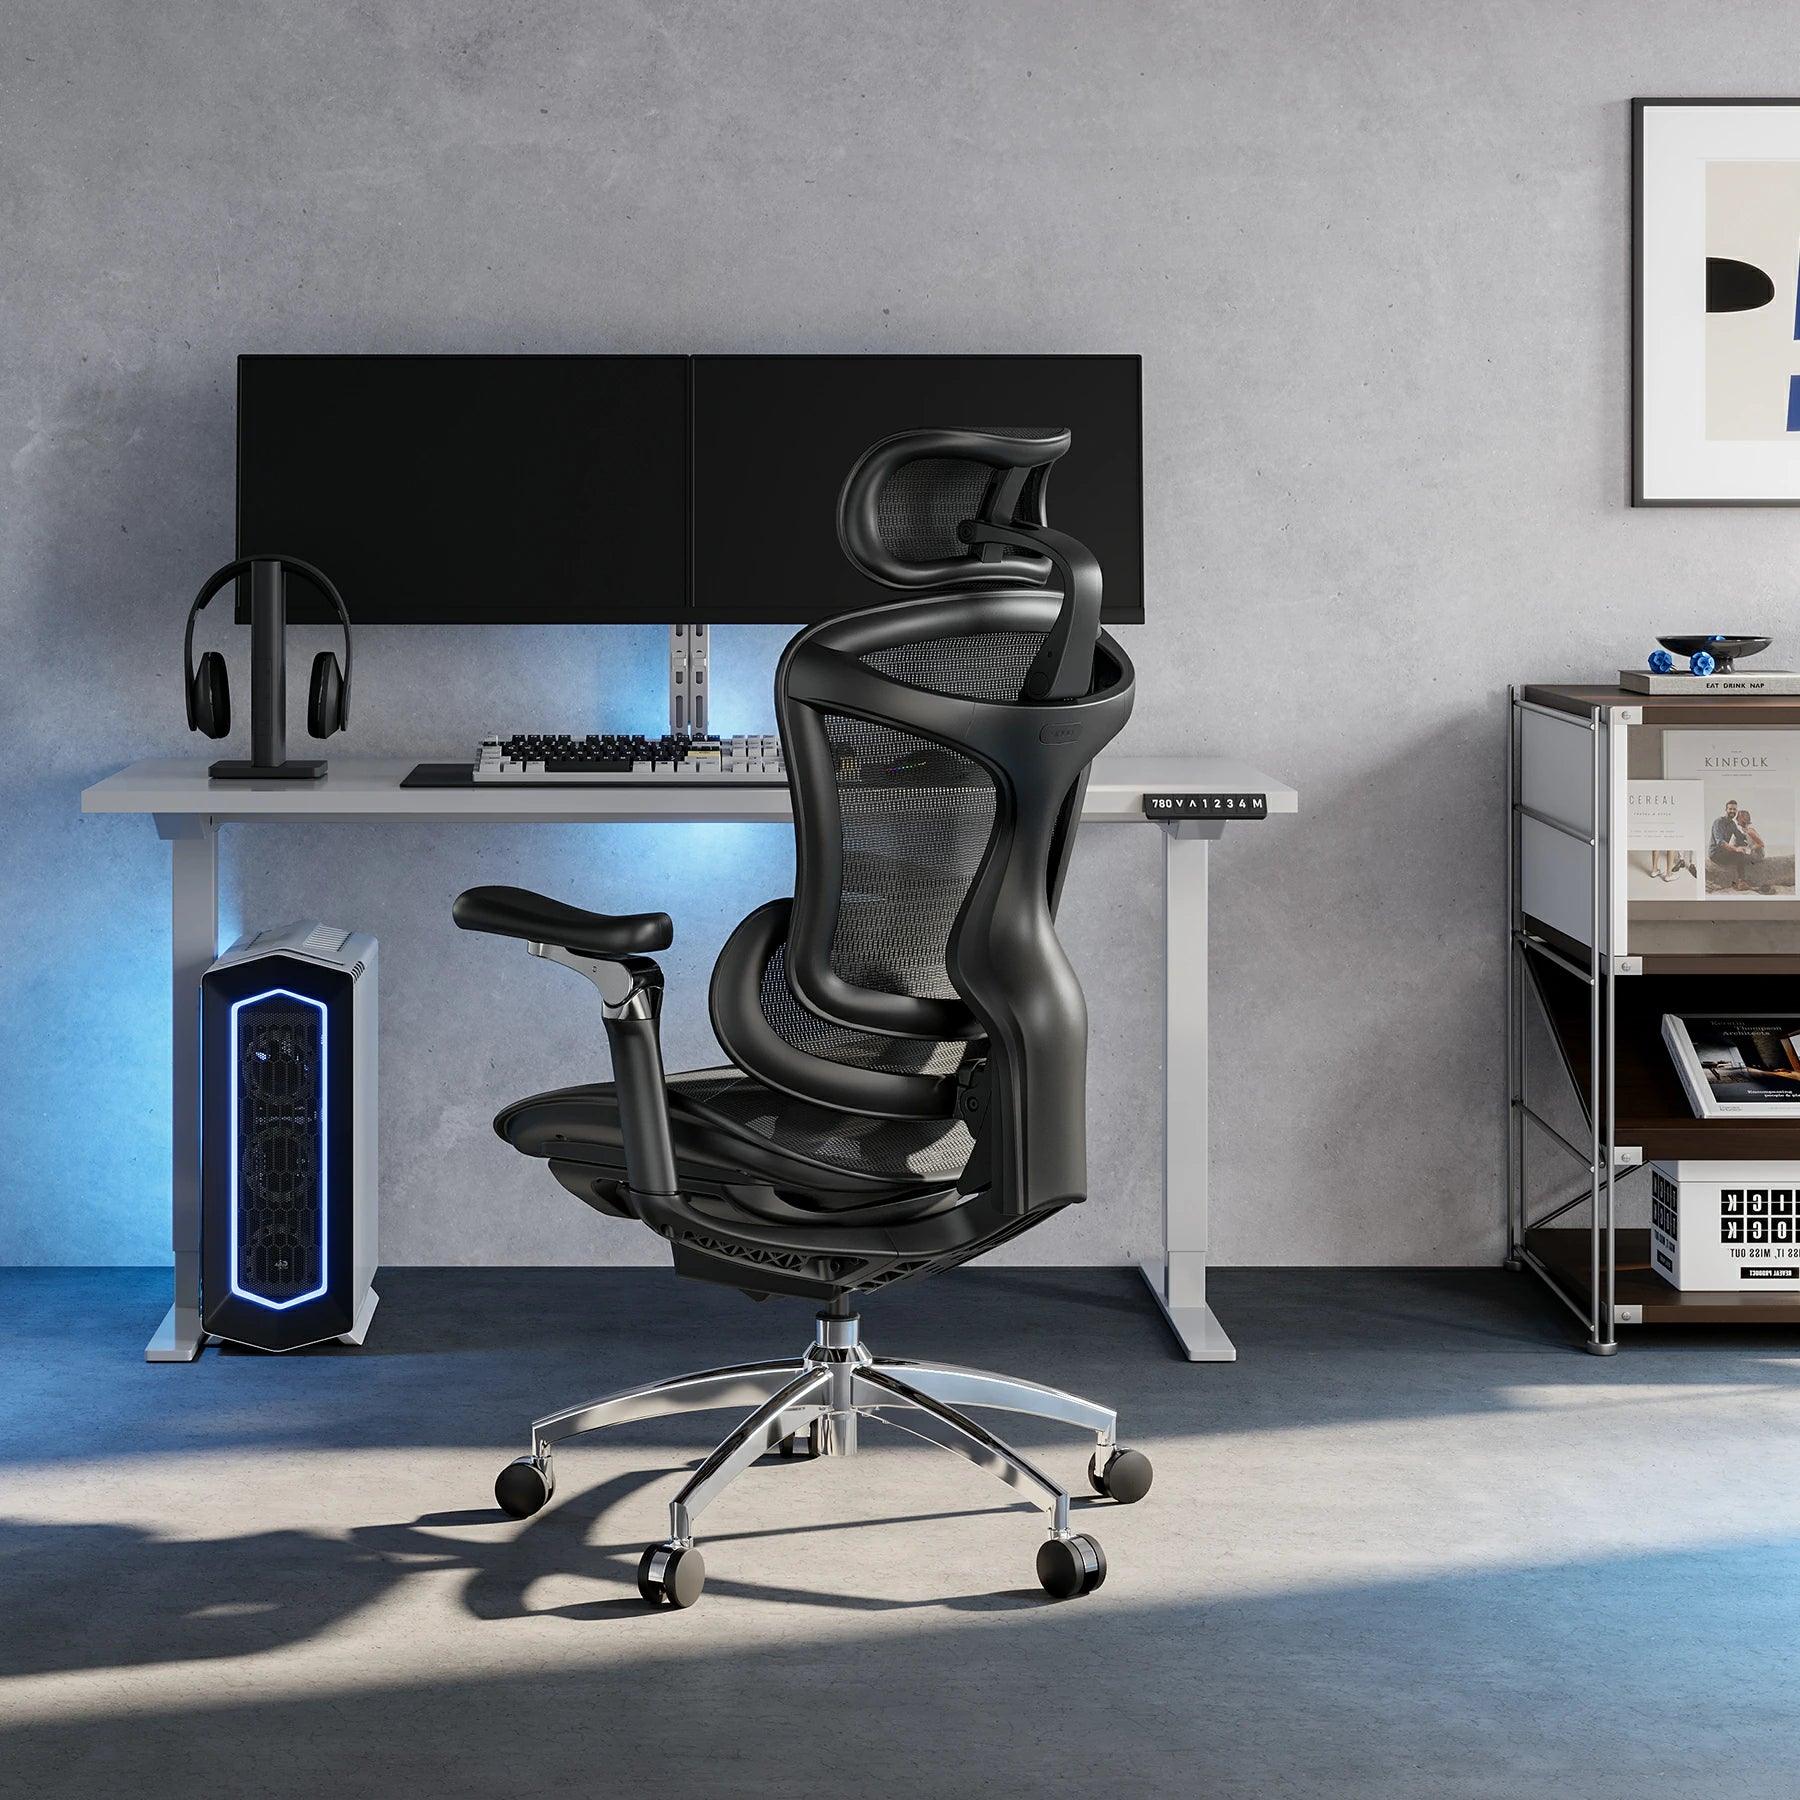 Did they update the SIHOO M18? : r/OfficeChairs